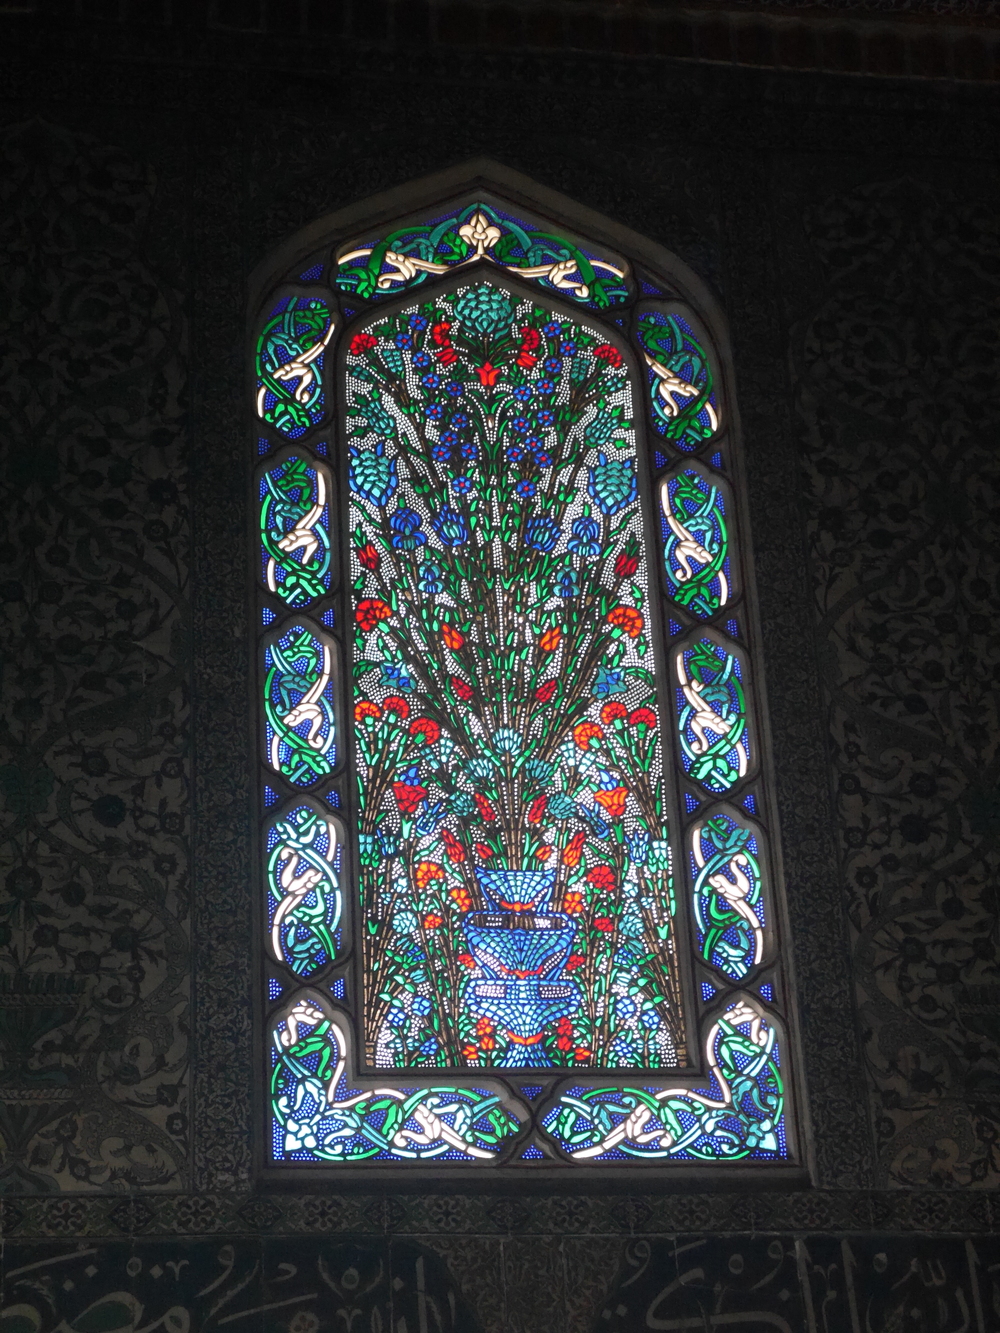  Stained glass window. 